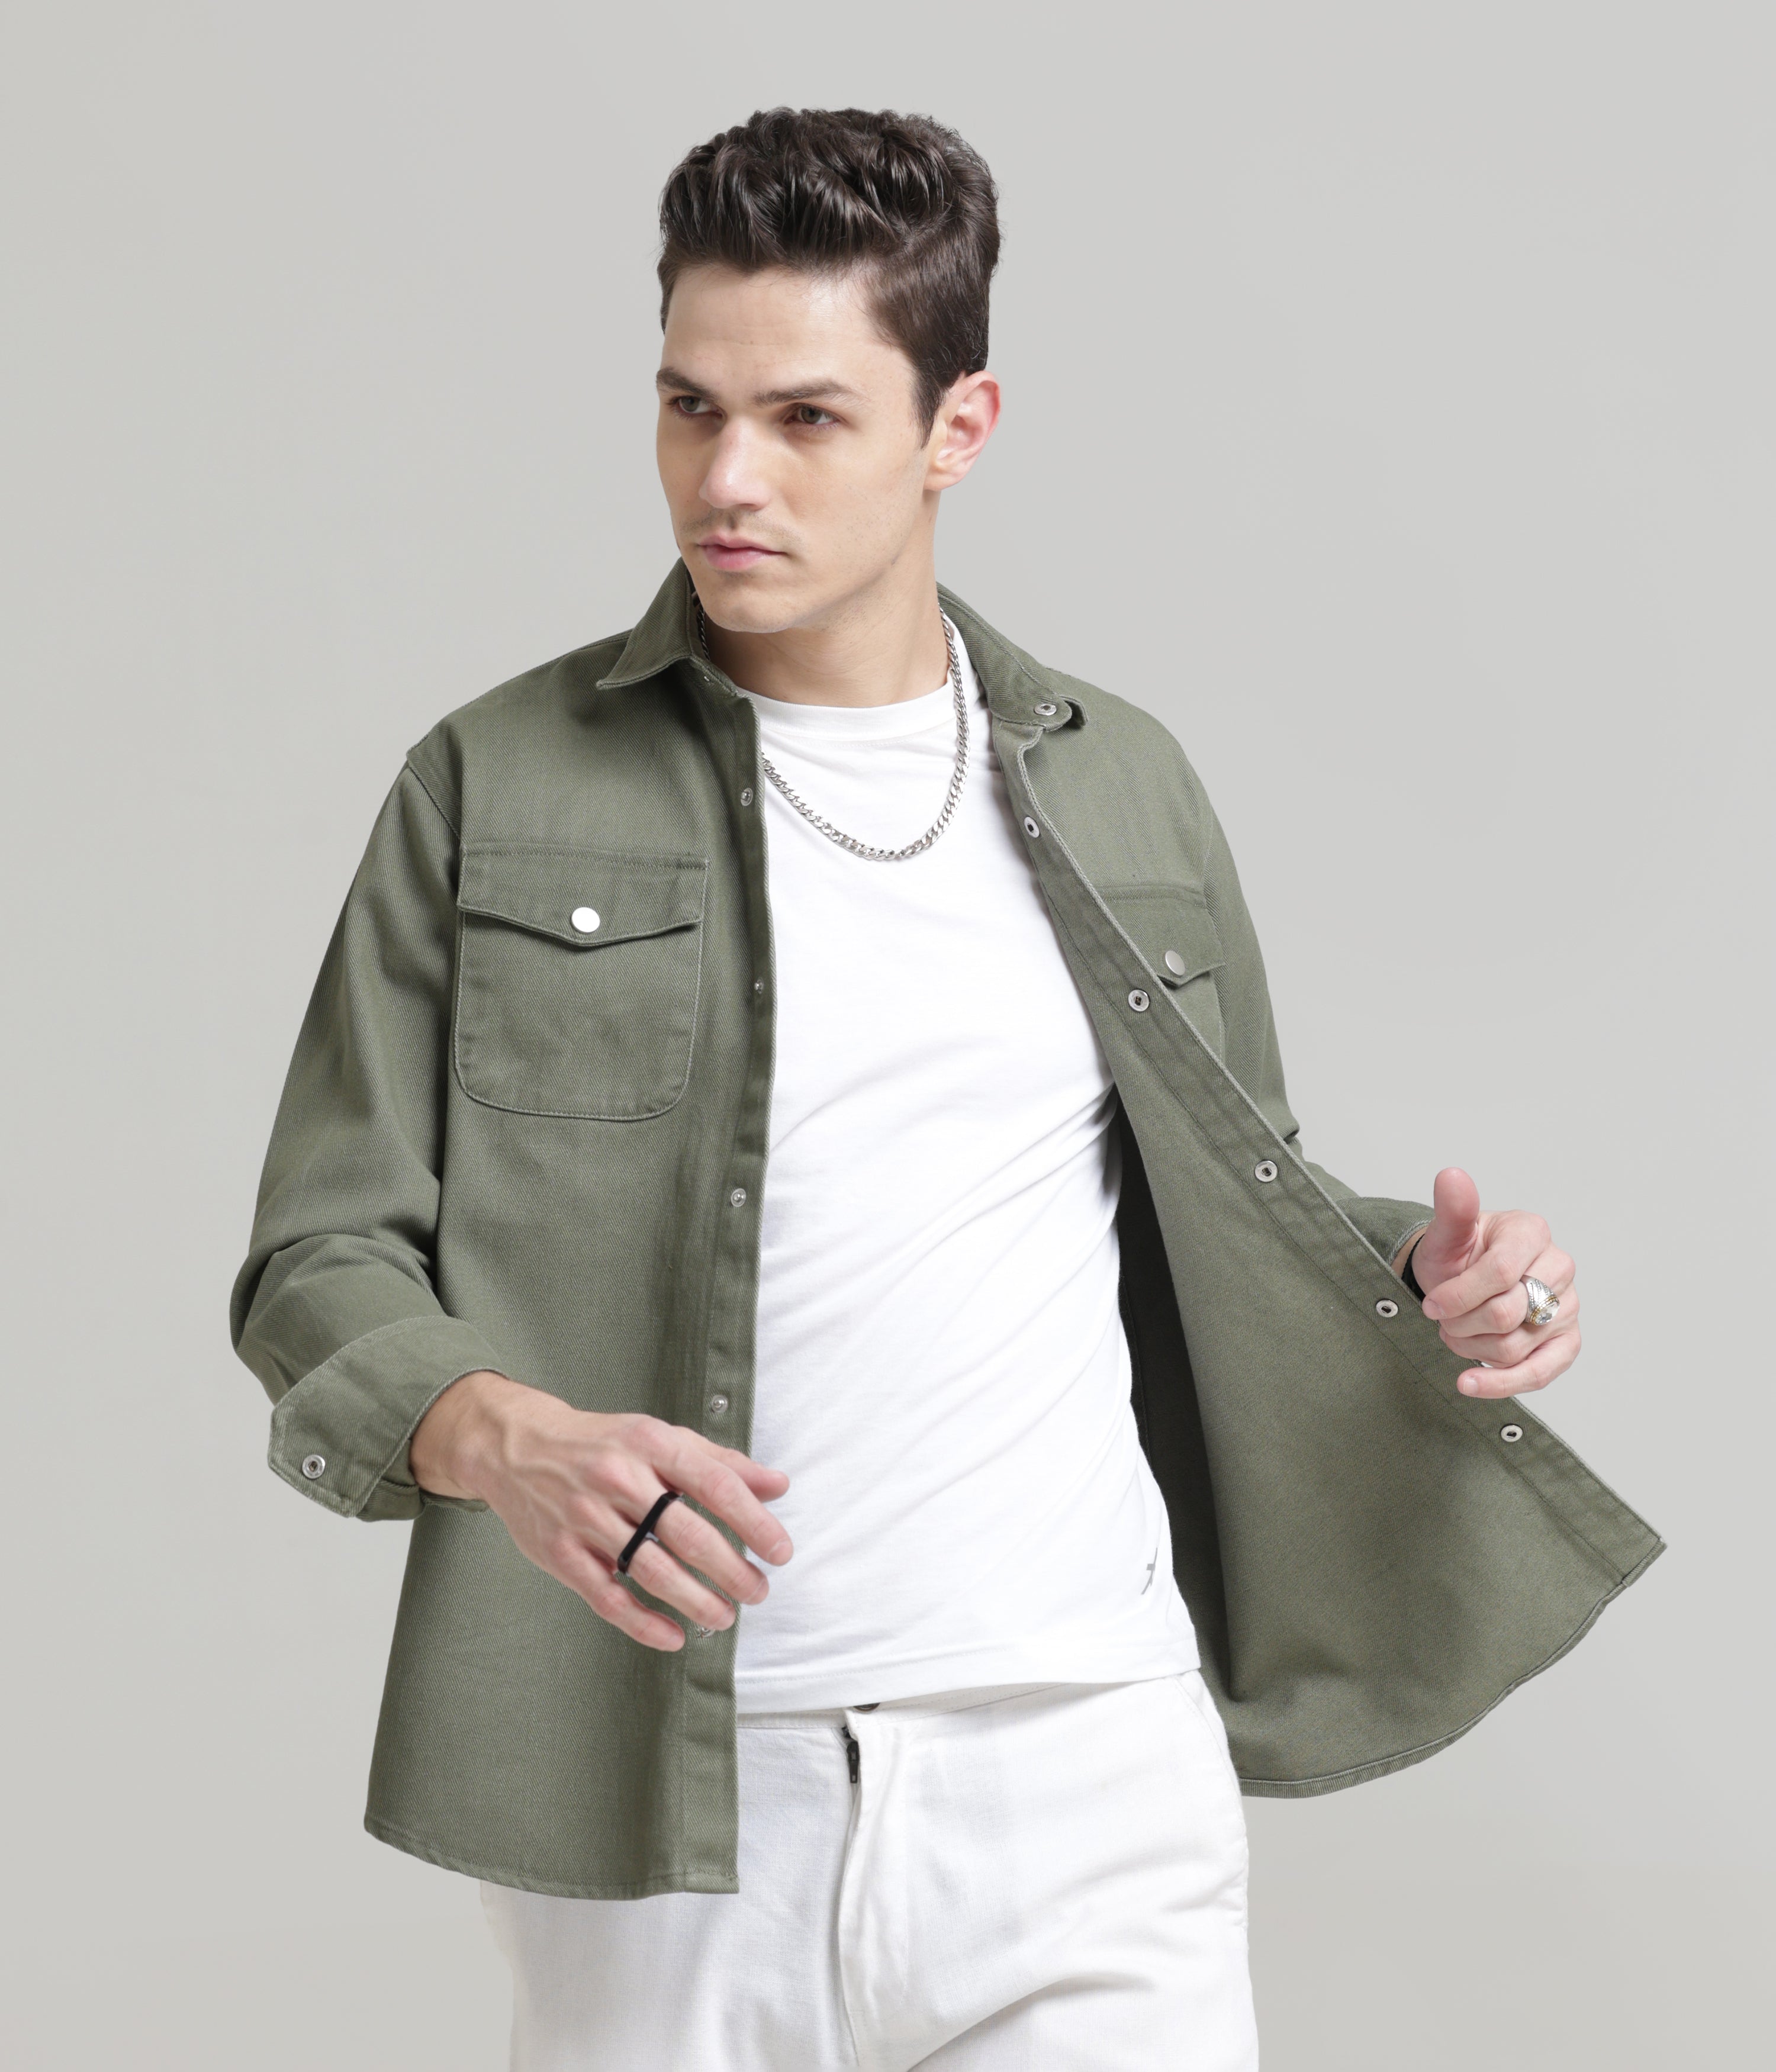 Olive Classic Fit Double Pocket Shirt in Heavy Twill Cotton